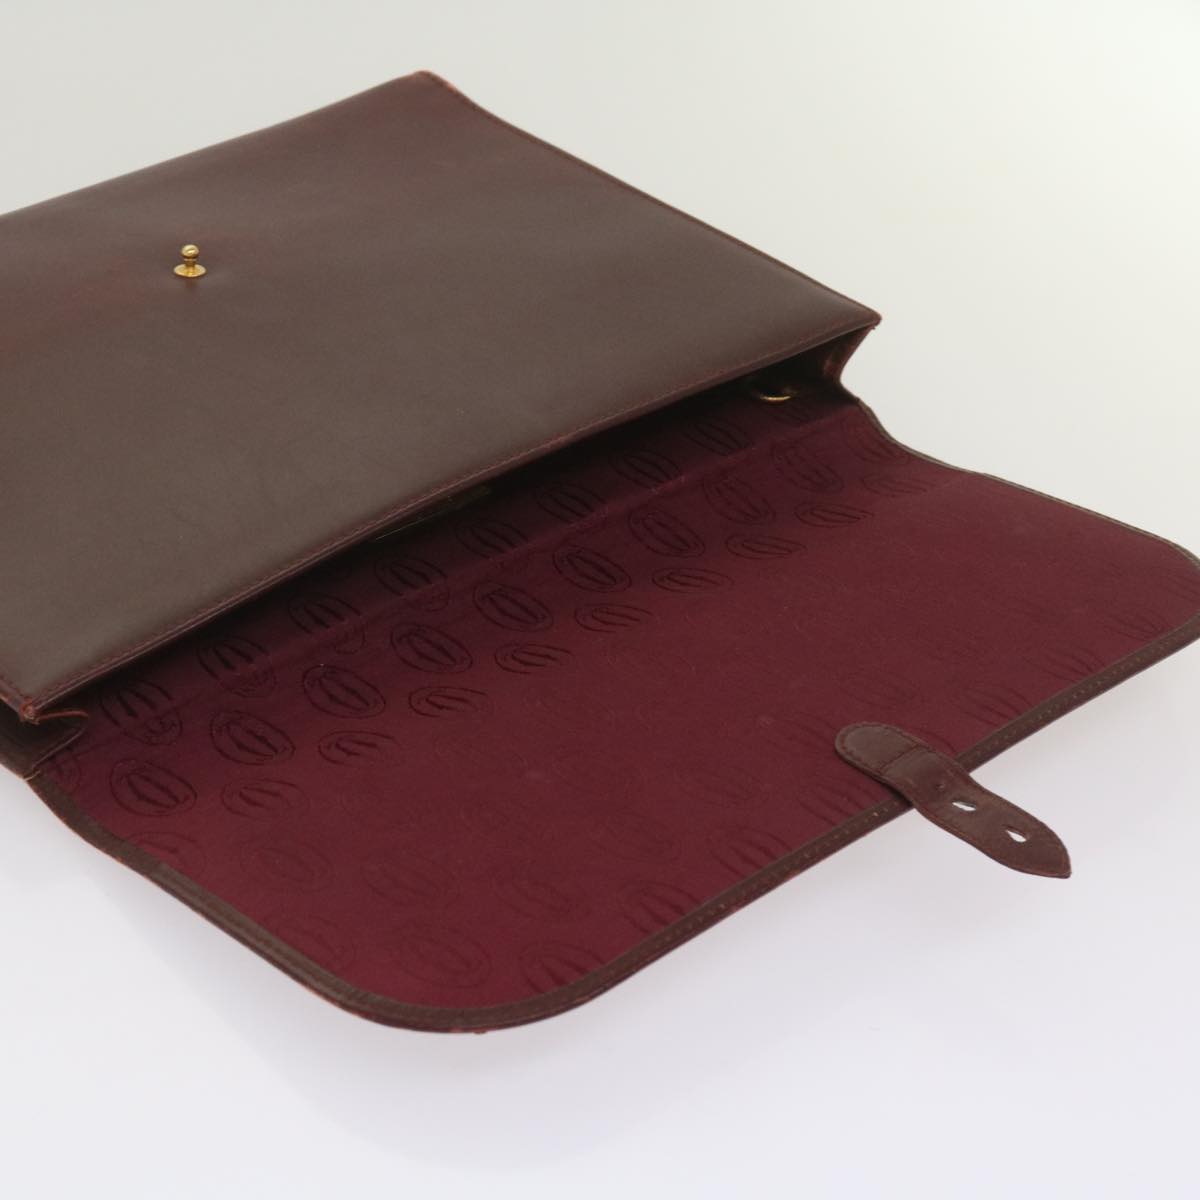 CARTIER Clutch Bag Leather 2Set Wine Red Auth bs12440